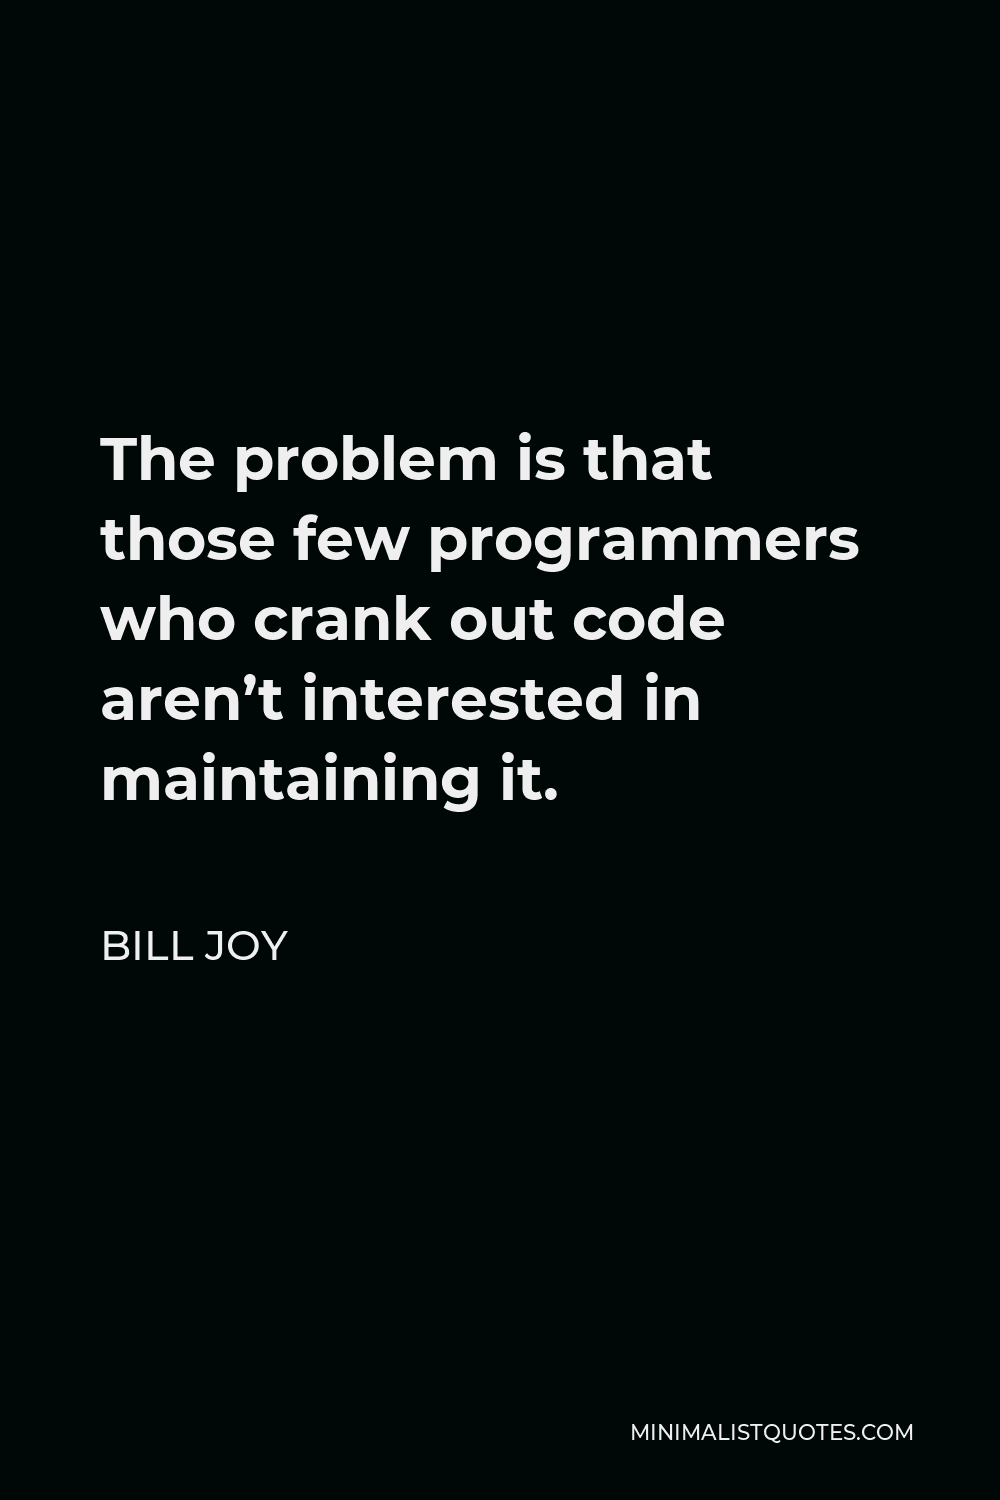 Bill Joy Quote - The problem is that those few programmers who crank out code aren’t interested in maintaining it.